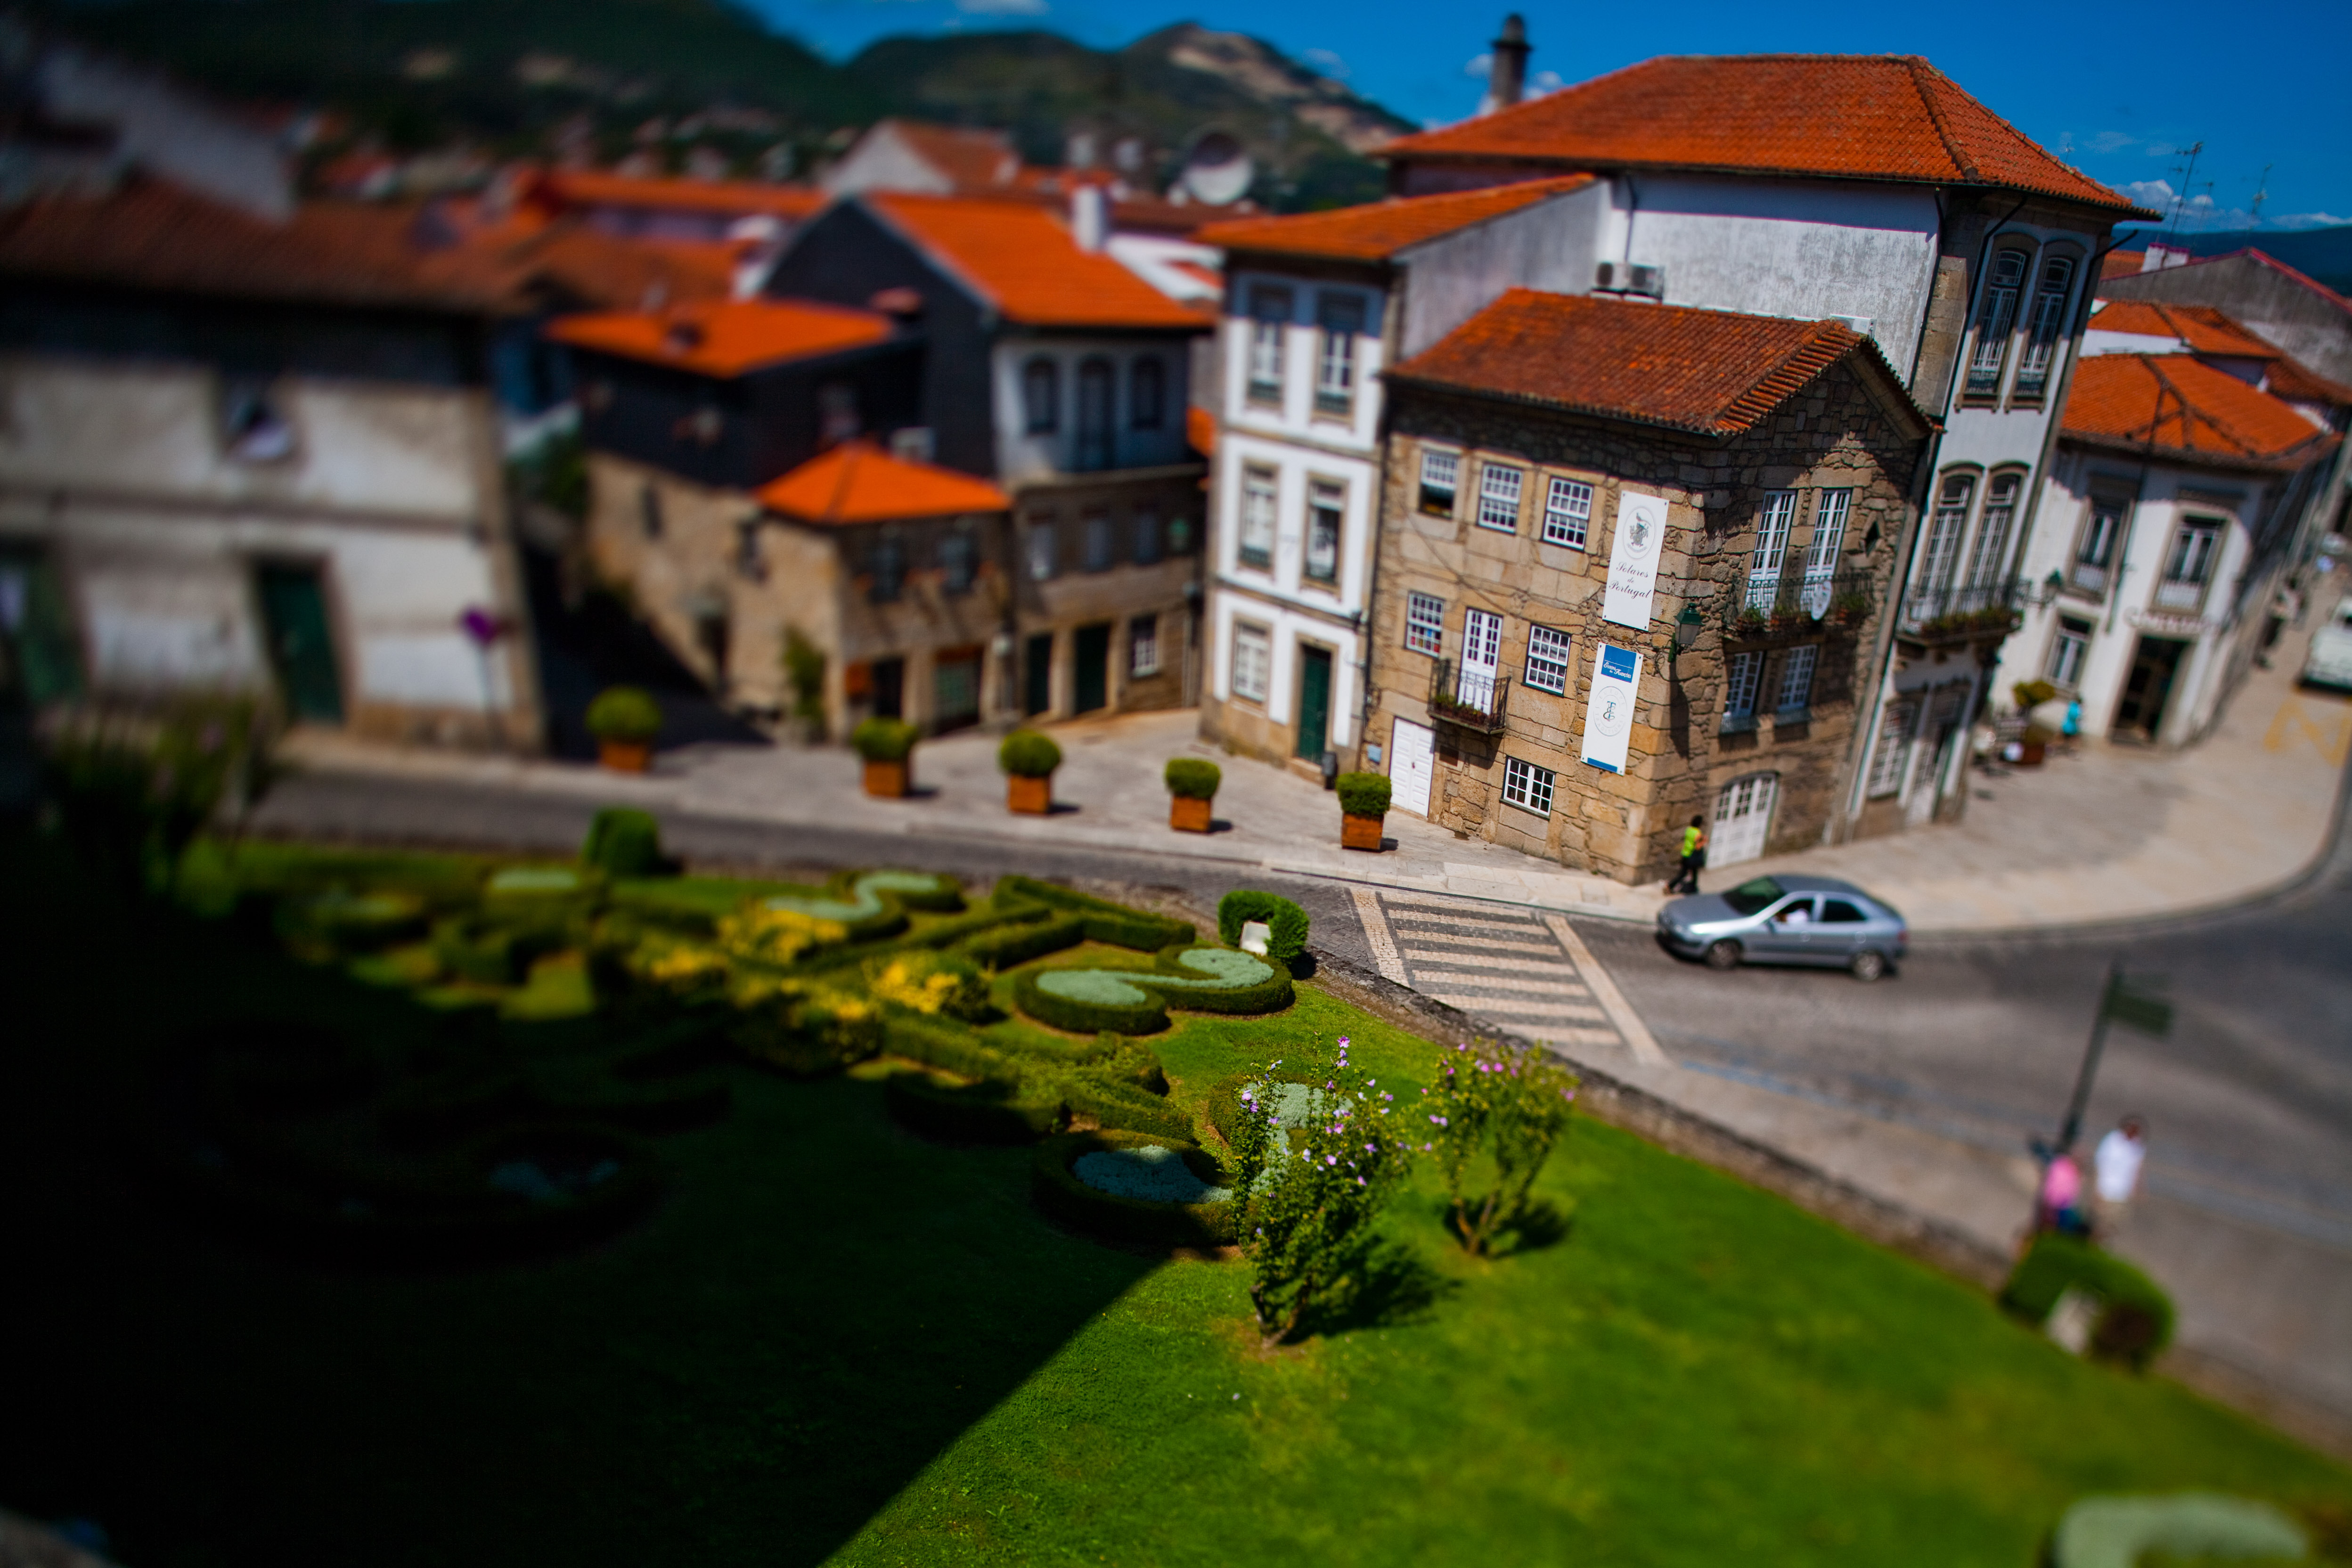 Portugal Town in Small Tilt Shift